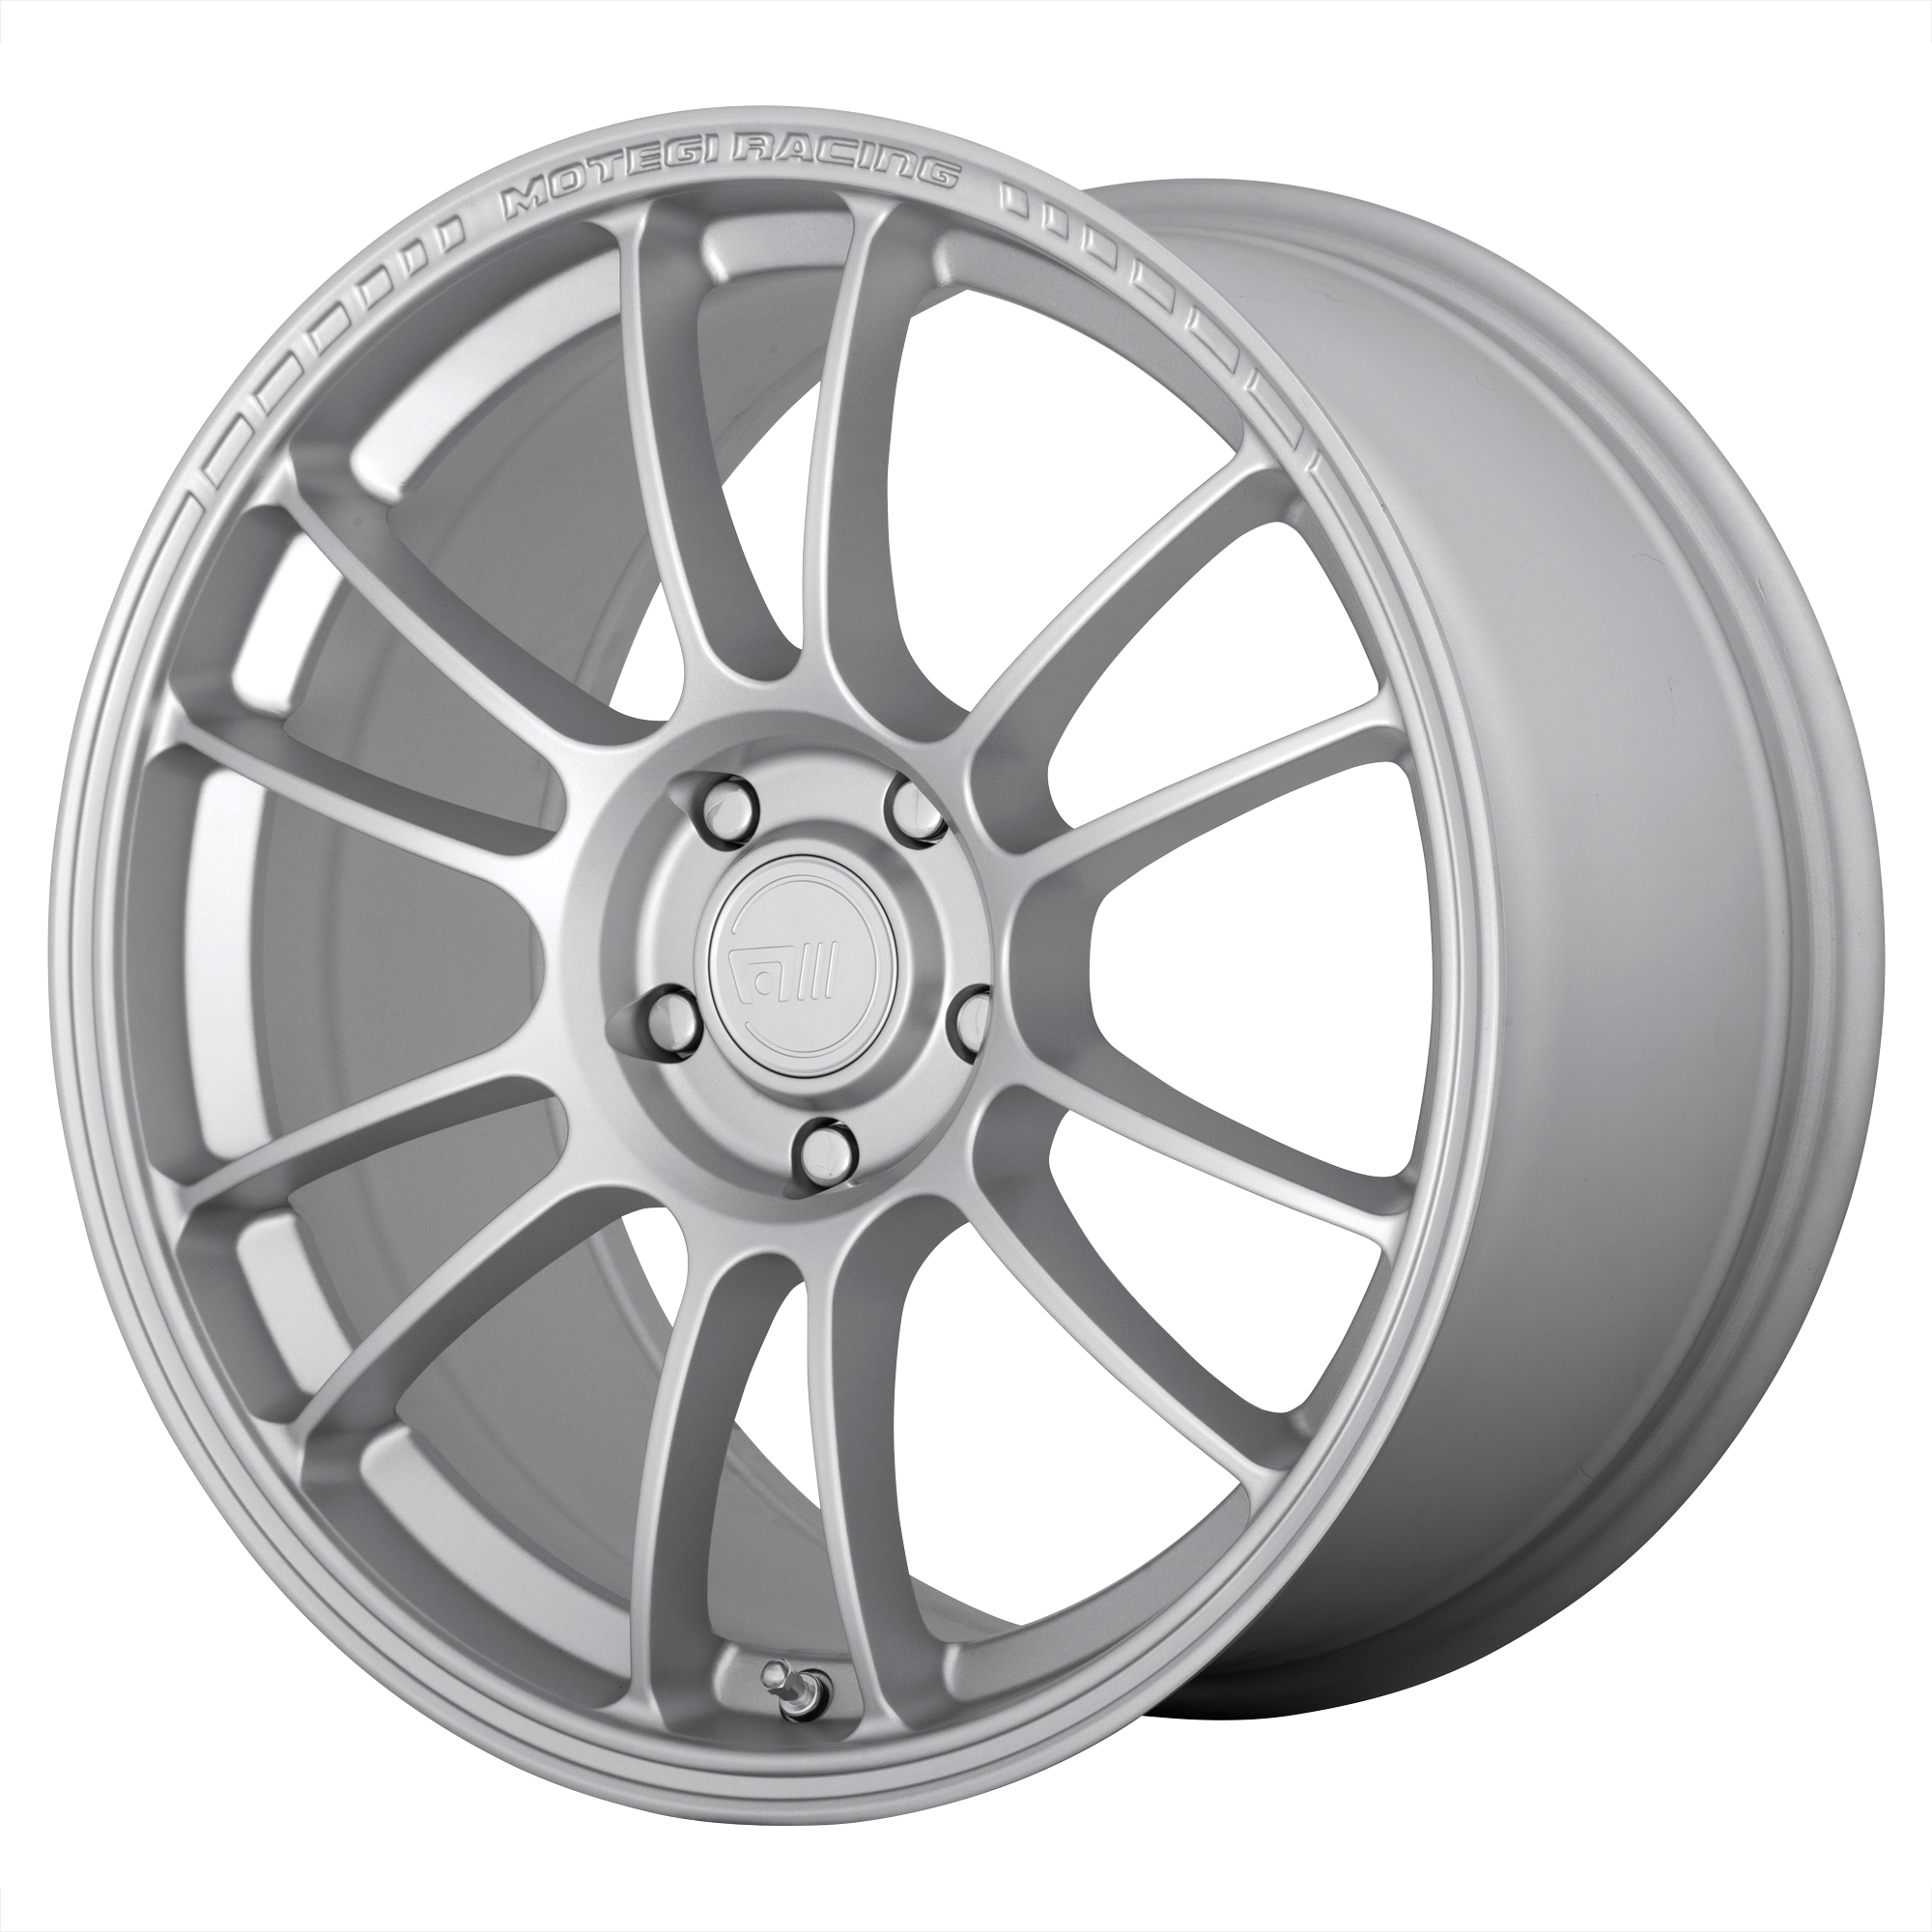 SS6 17x7 5x112.00 HYPER SILVER (42 mm) - Tires and Engine Performance